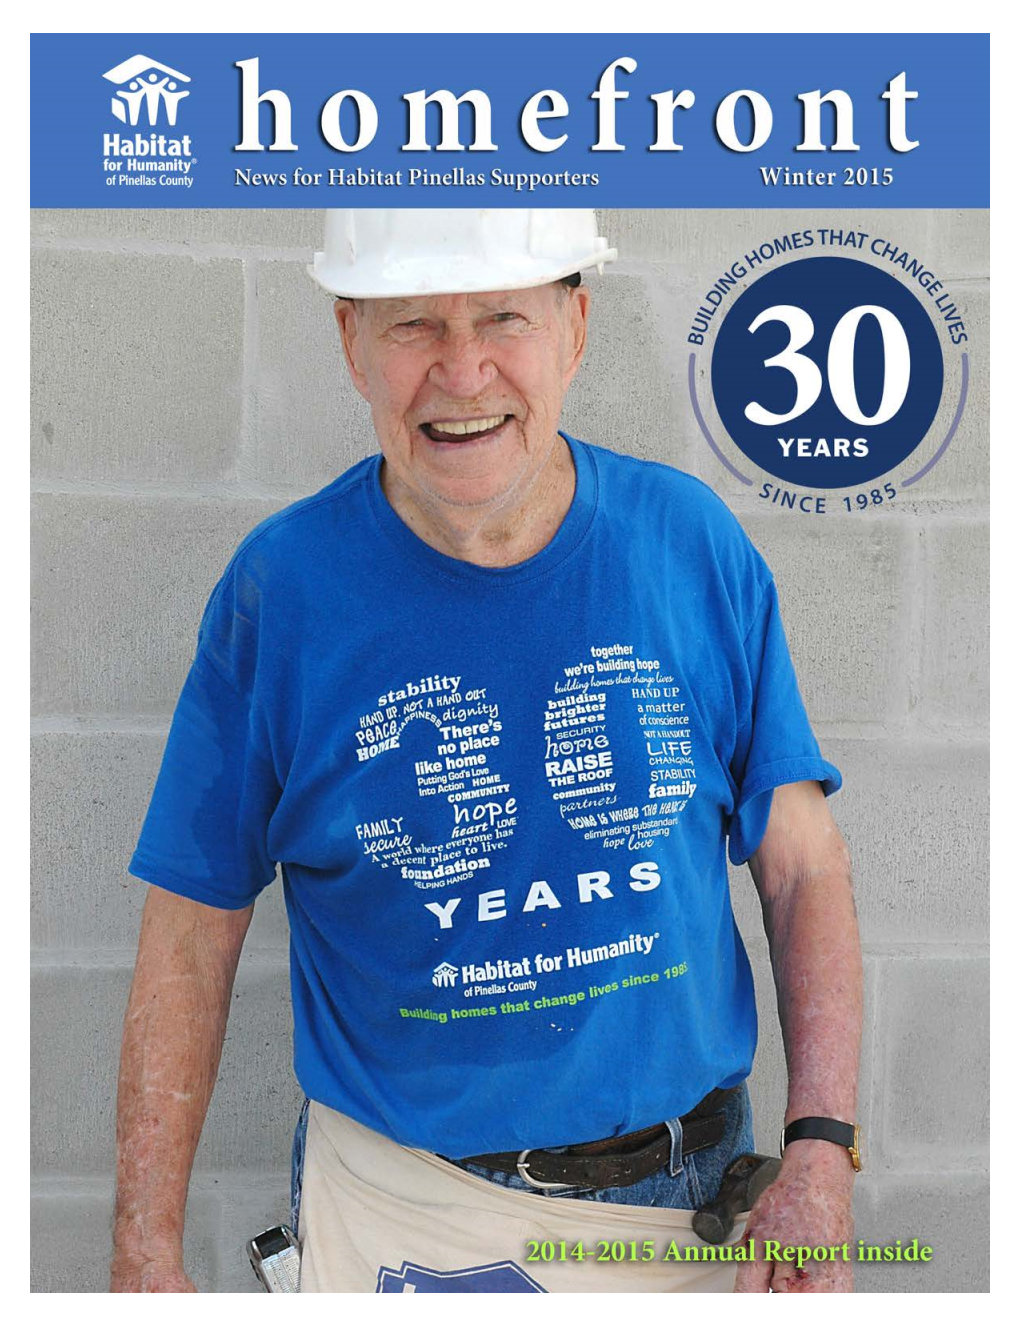 2015 Annual Report from Habitat for Humanity of Pinellas County